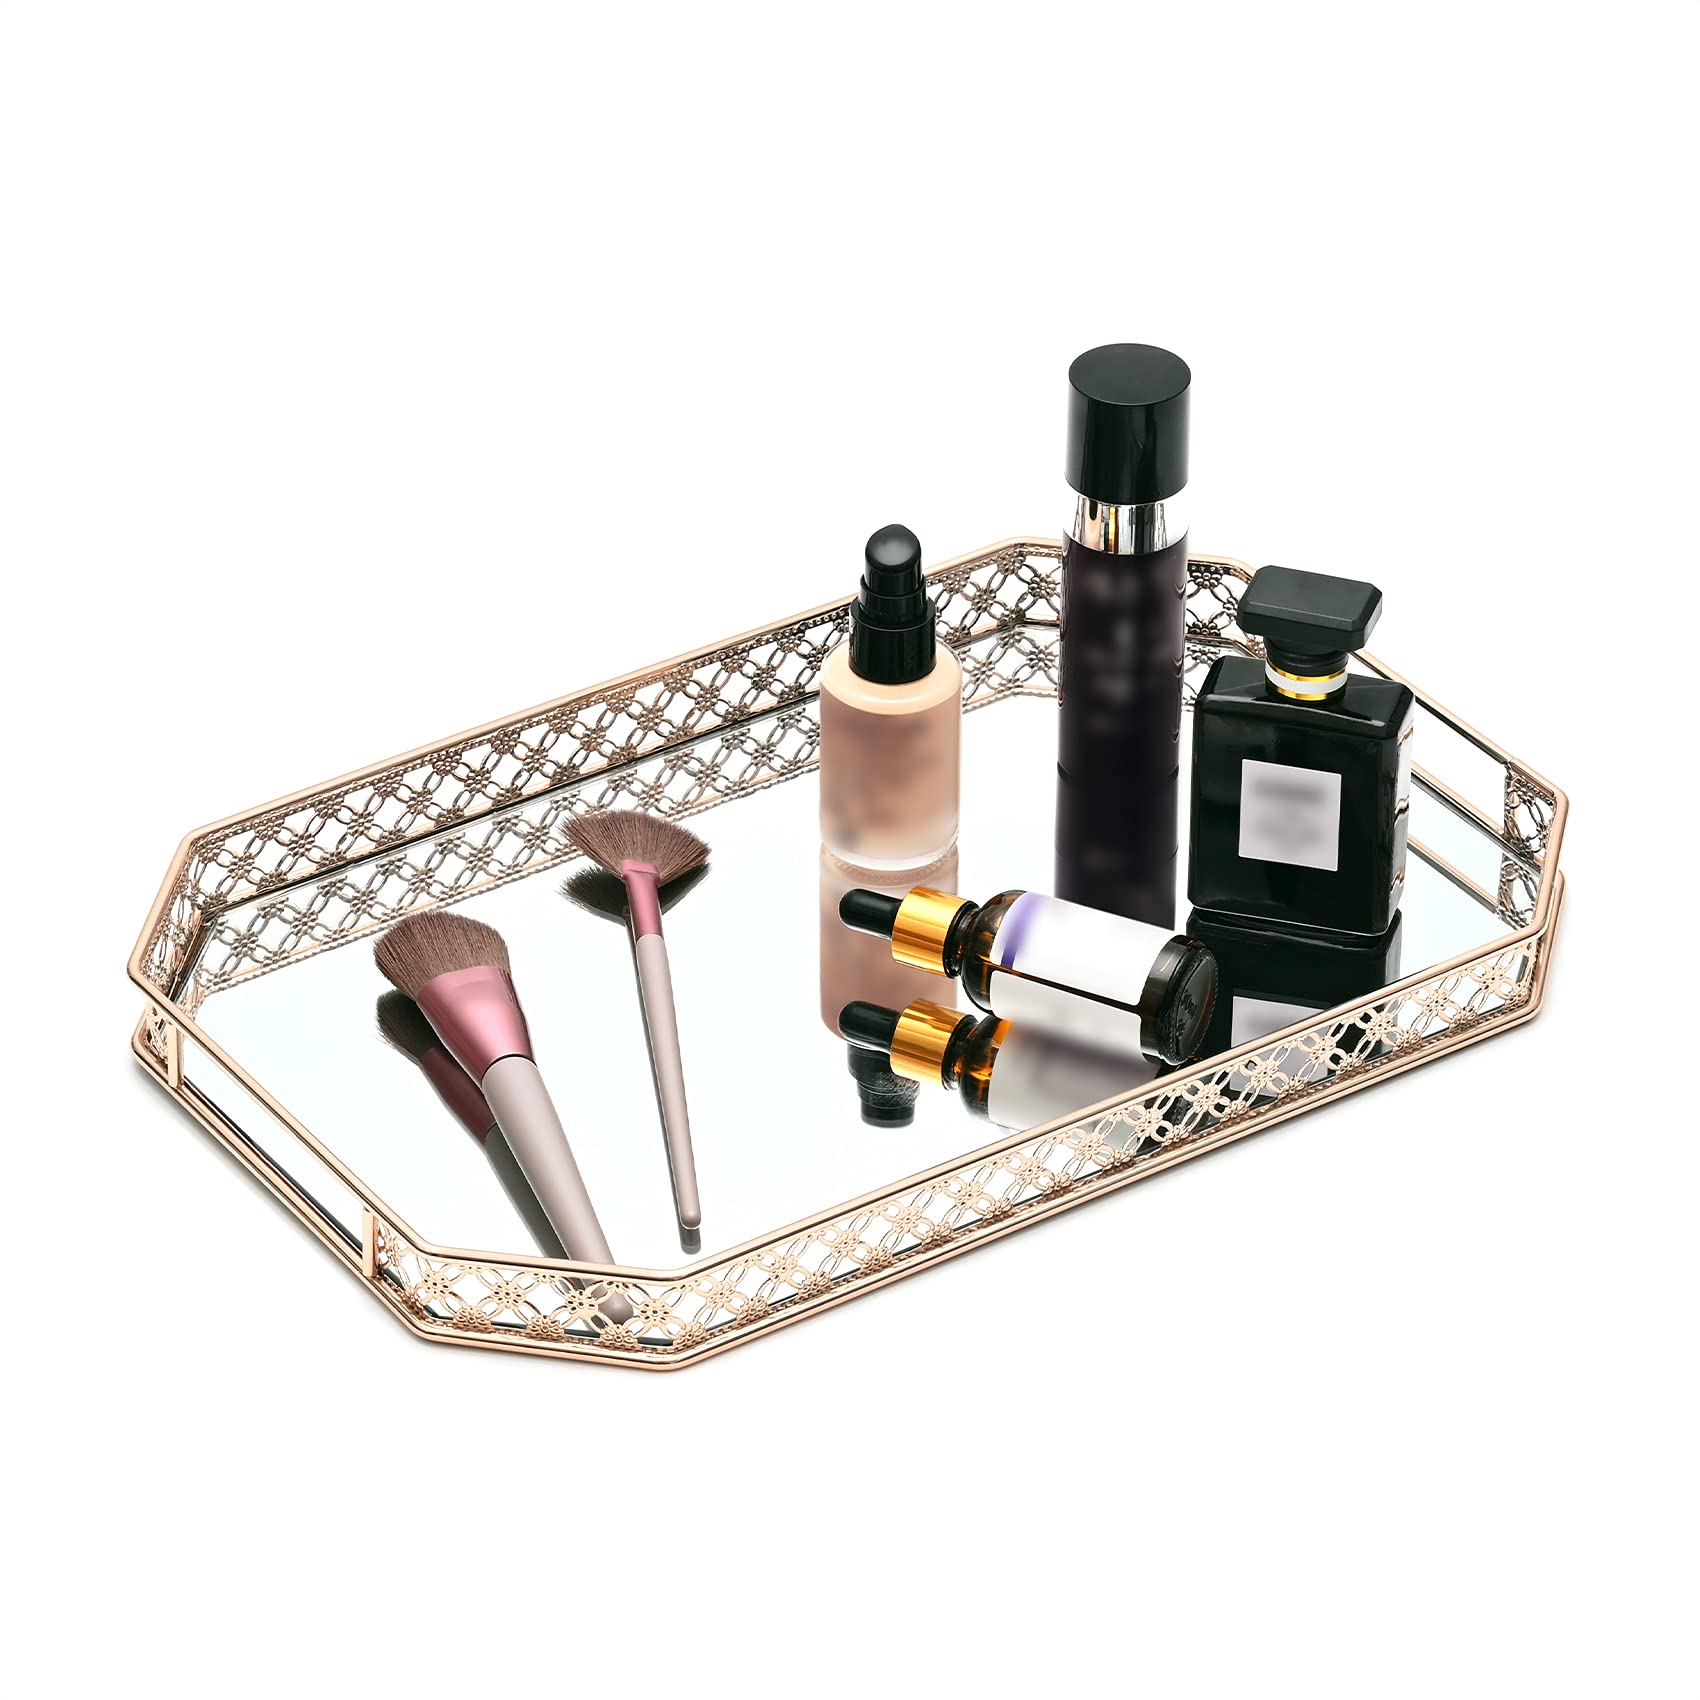 Gold Mirror Tray, Perfume Tray for Dresser, Gold Vanity Trays for Bathroom and Home Decor, 11.6 x 7.7 x 1.2 inches